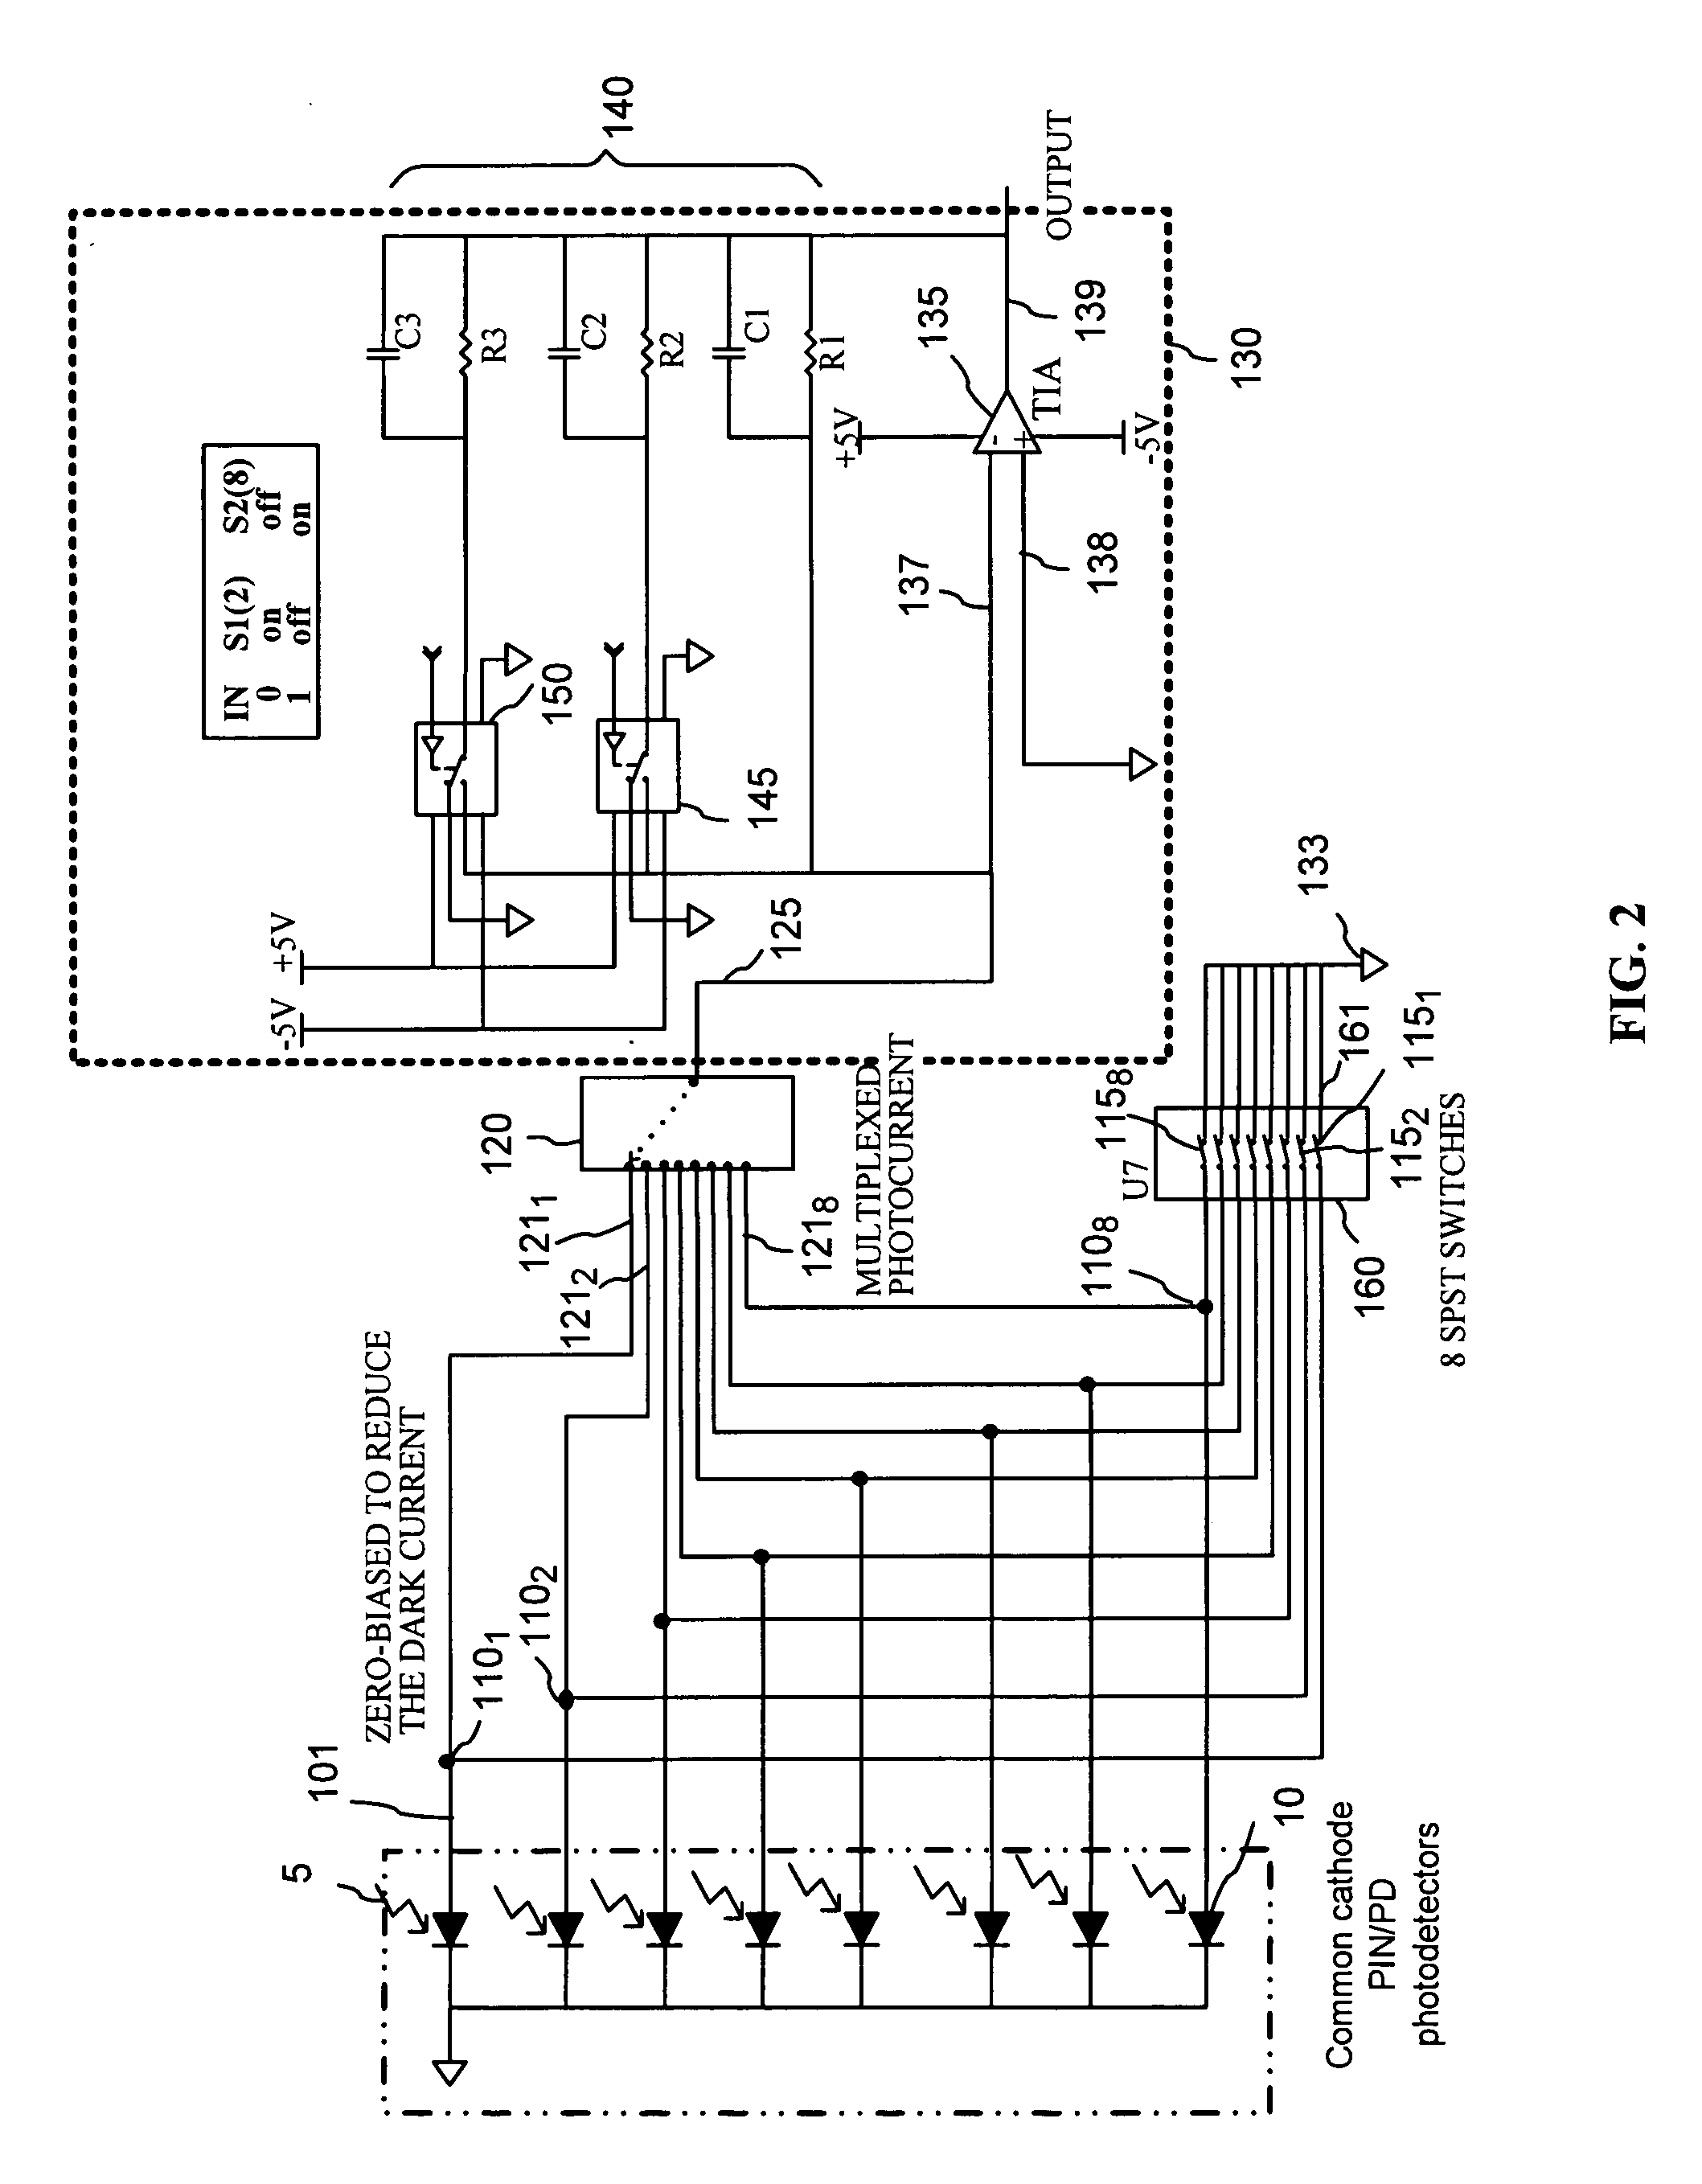 Current multiplexing circuit for optical power monitoring